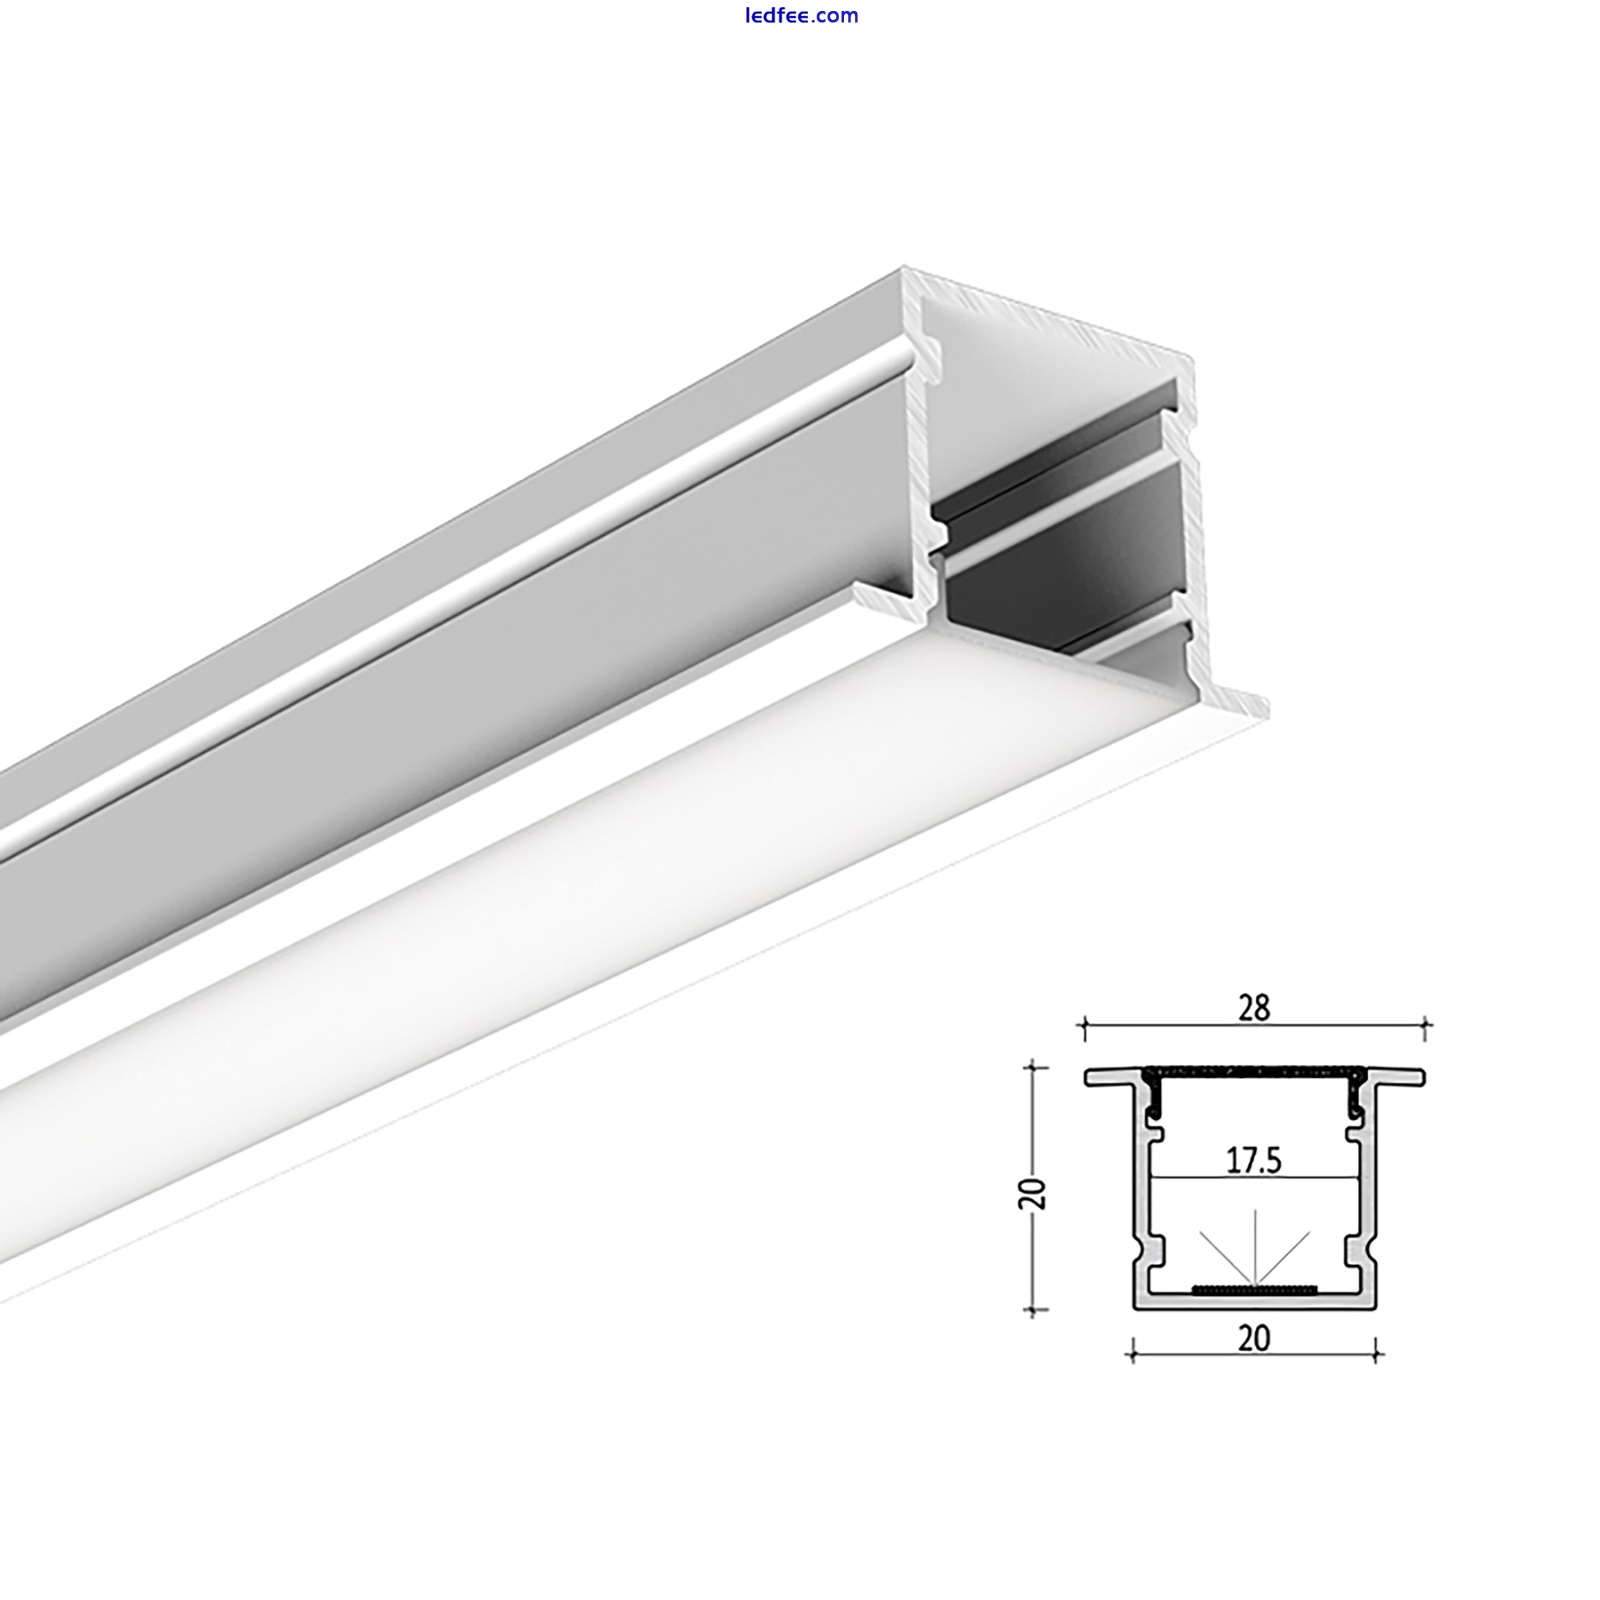 1M 2M LED Profile Aluminium Channel Extrusion Housing Track For LED Strip Light 3 